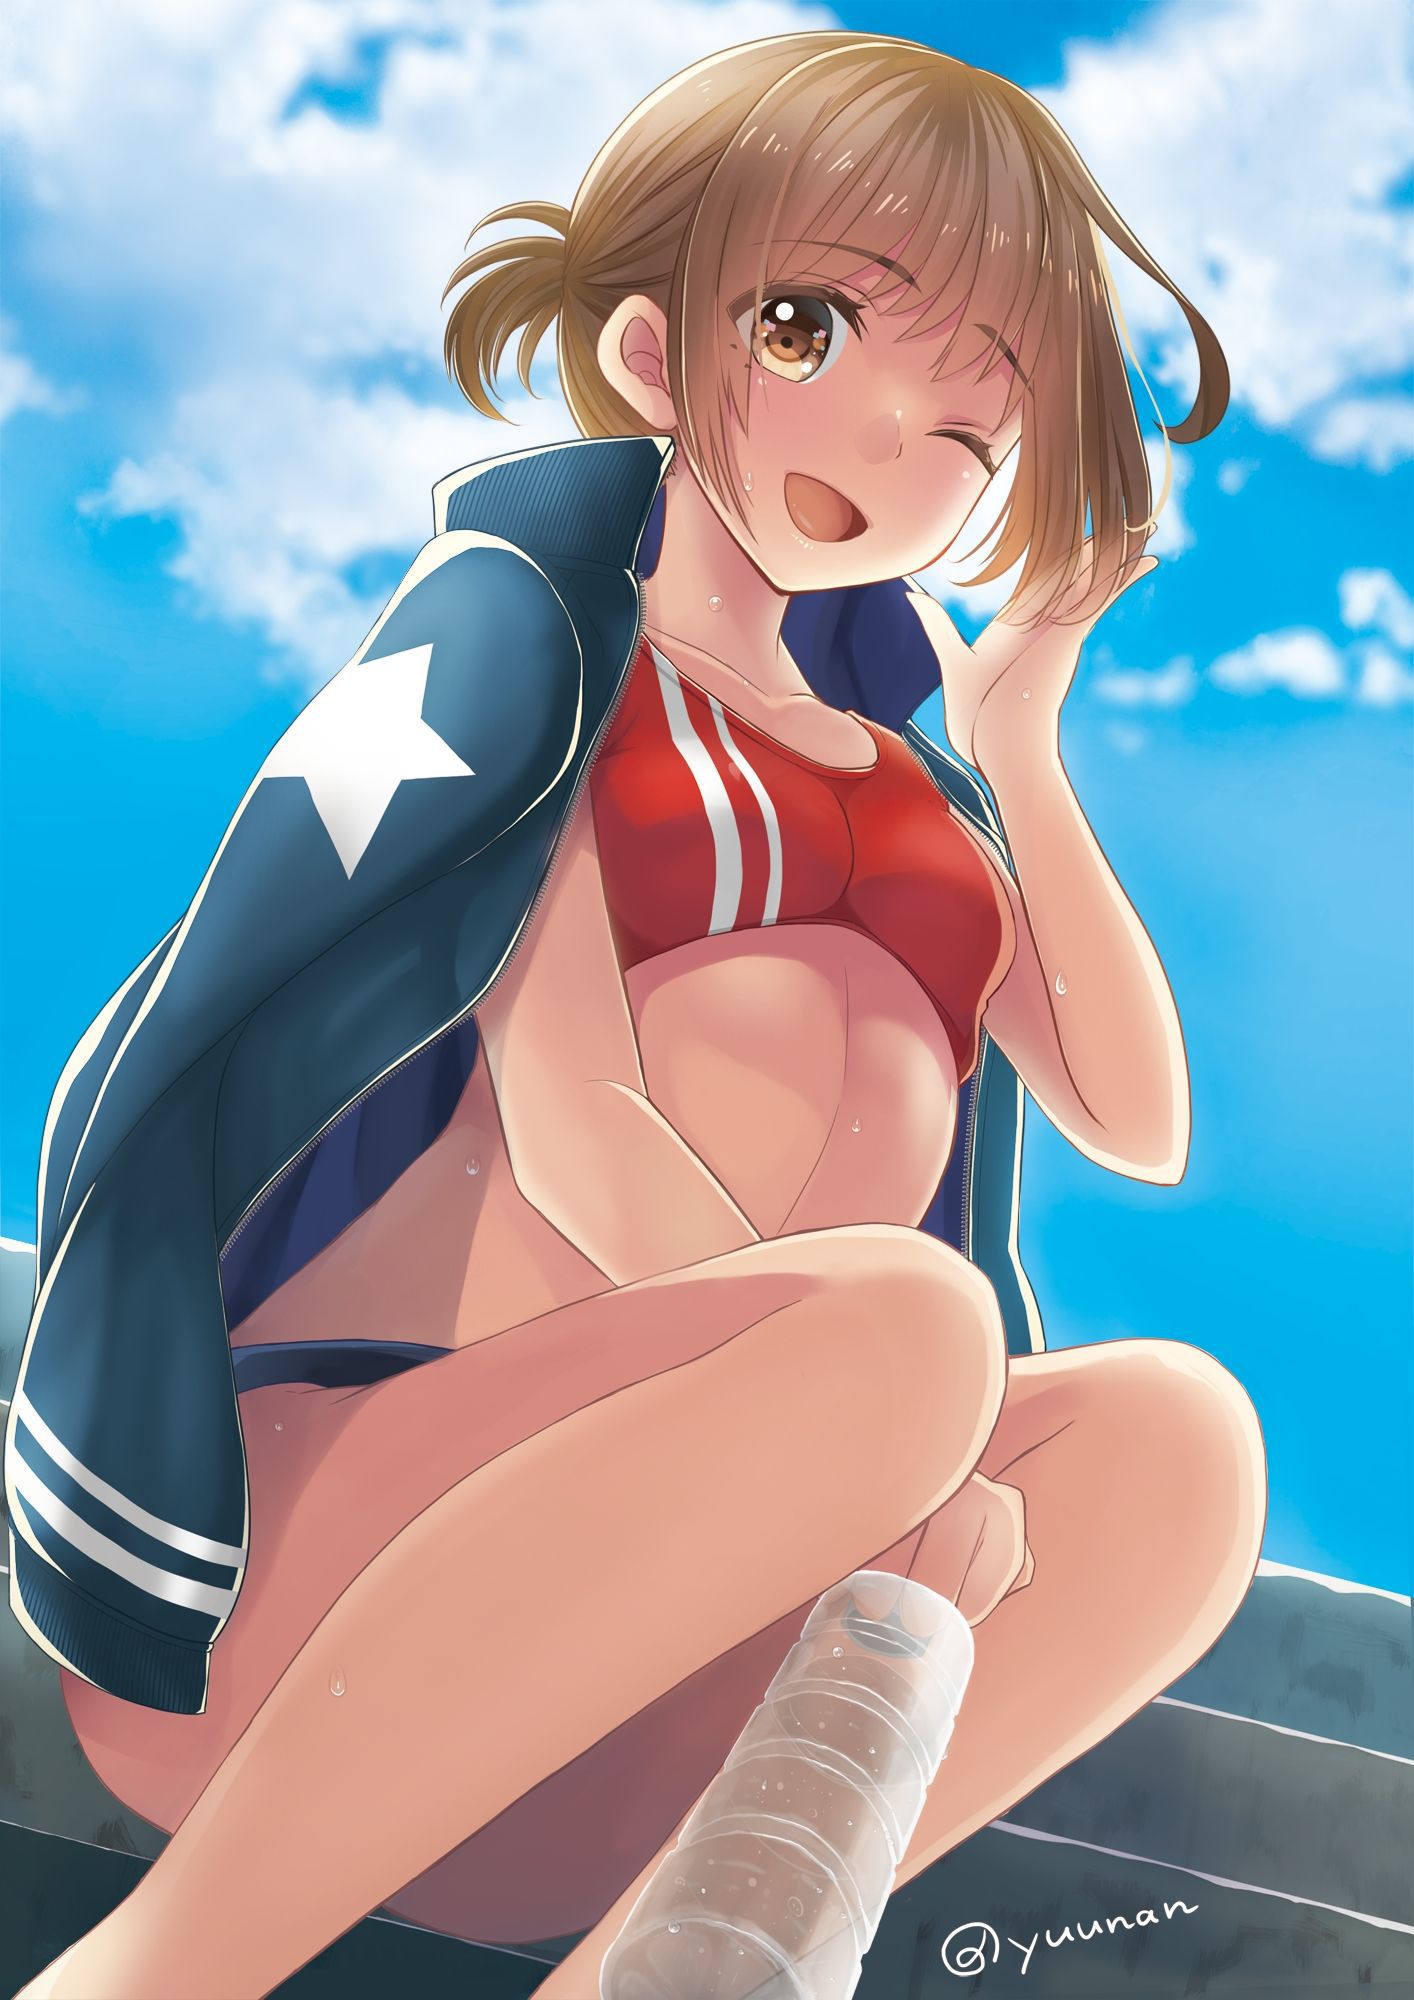 【2nd】Erotic image of a girl in sportswear Part 8 3